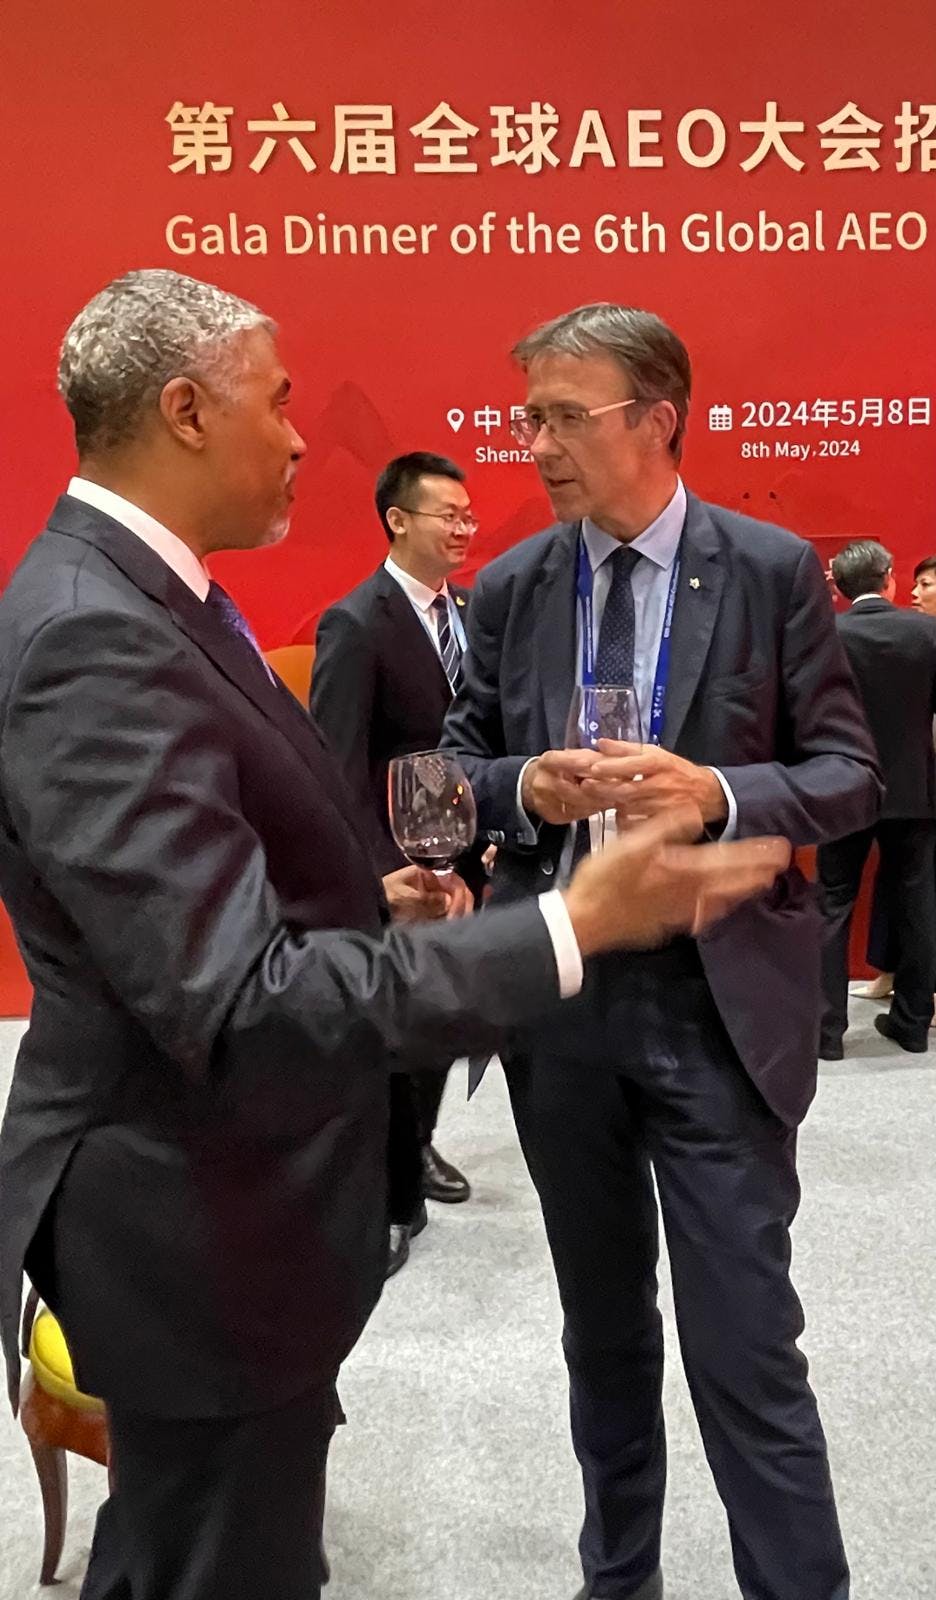 WCO Secretary General, Mr Ian Saunders, and FIATA Director General, Dr Stéphane Graber at the 6th WCO Global AEO conference in Shenzhen discussing Mr Saunders participation at the forthcoming FIATA World Congress 2024 in Panama in September 2024